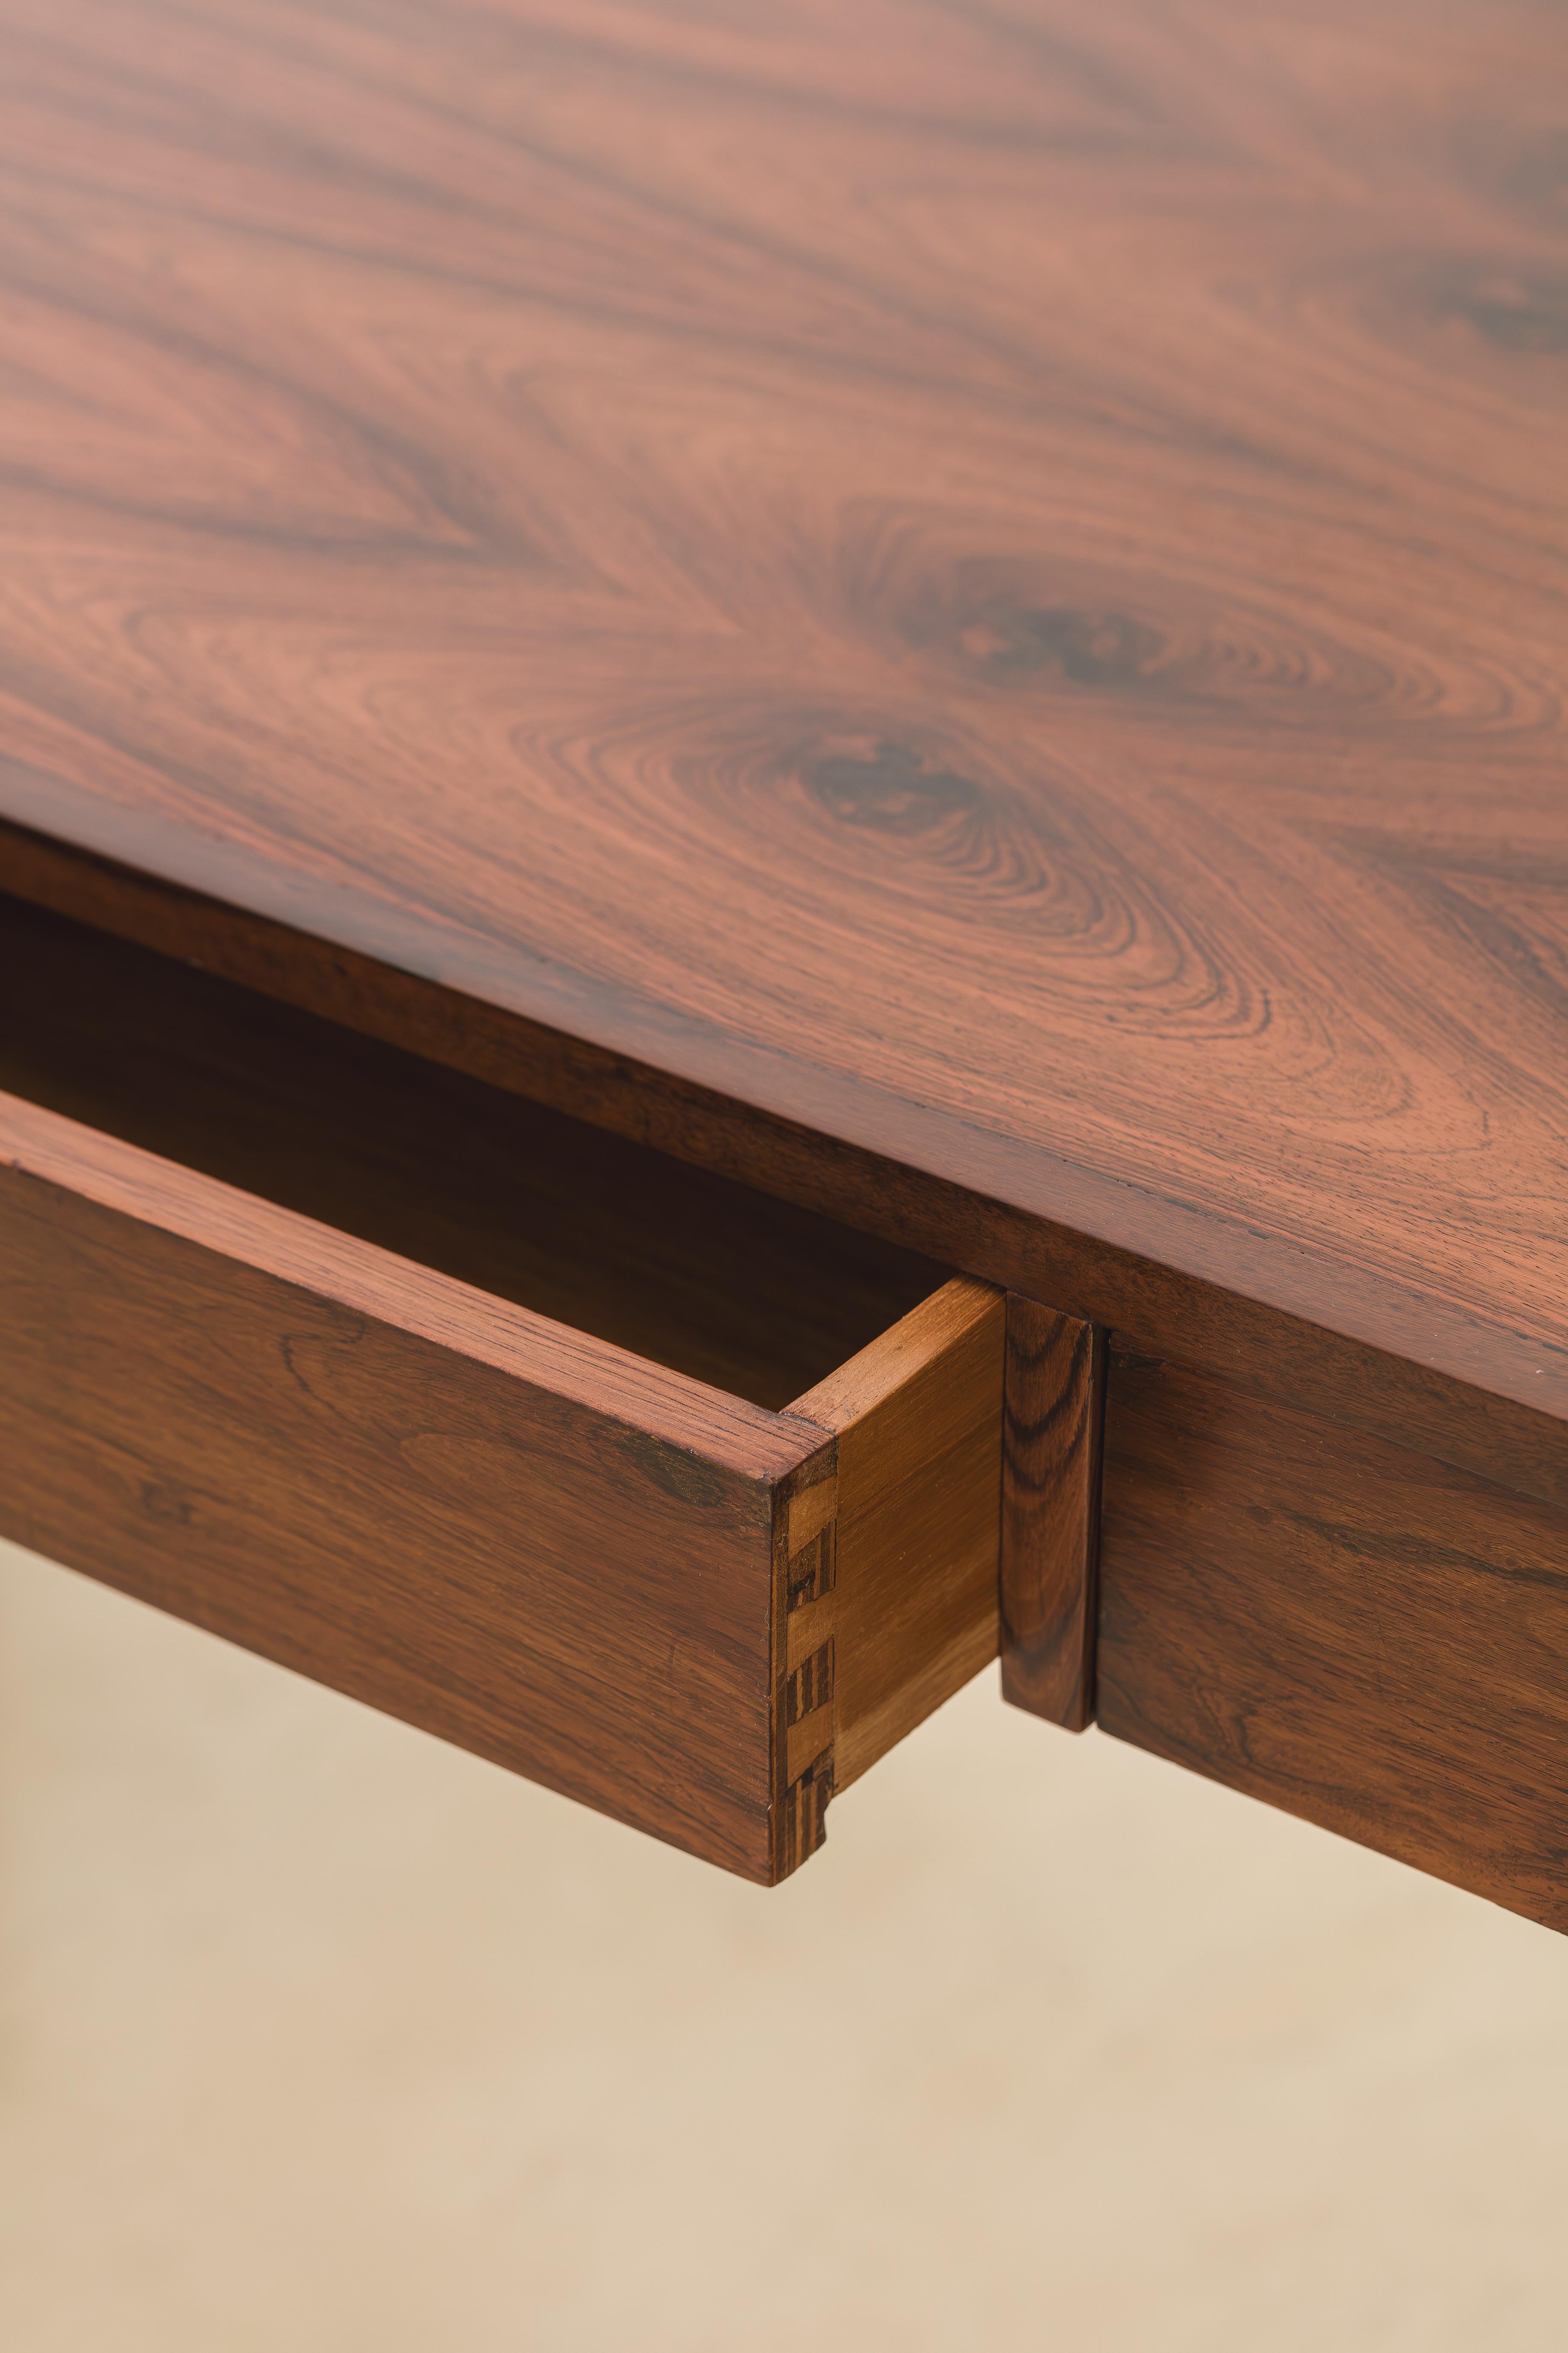 Rosewood Desk by Joaquim Tenreiro, Bloch Editors, Brazilian Midcentury, 1965 In Good Condition For Sale In New York, NY